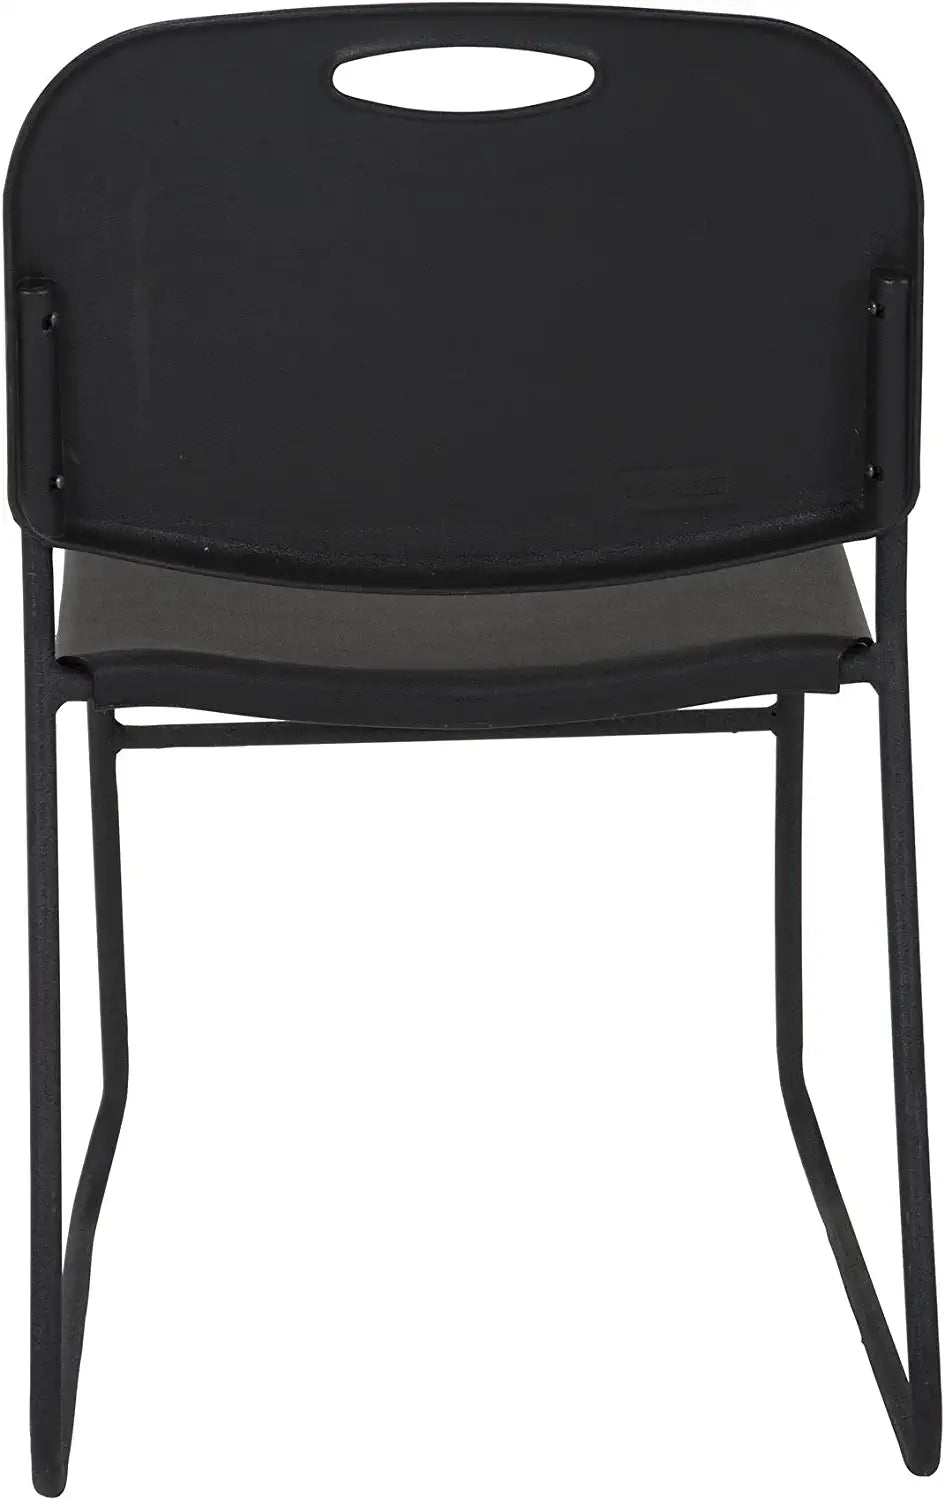 COSCO Commercial Contoured Back Resin Stacking Chair, Black, 4 Pack